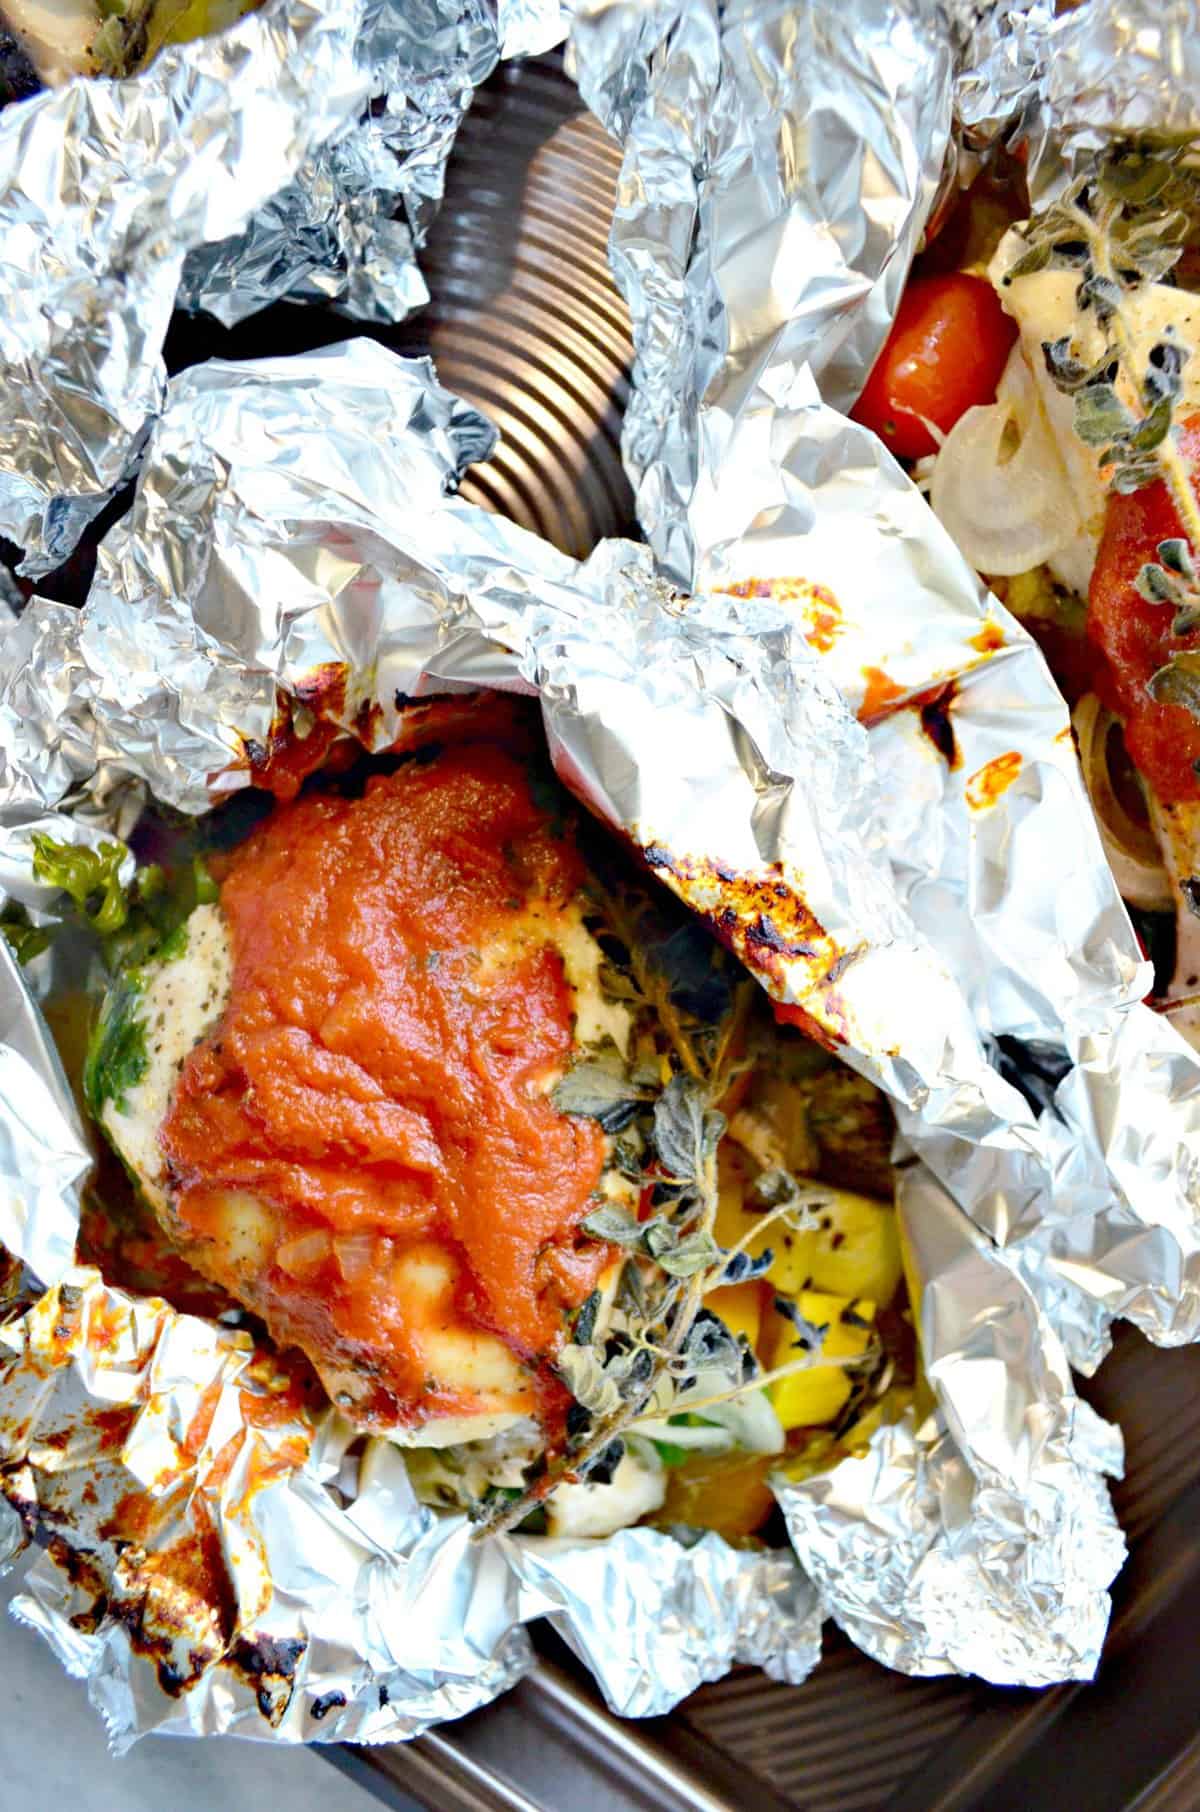 close up of 2 pieces of chicken in an open foil with herbs and red sauce.